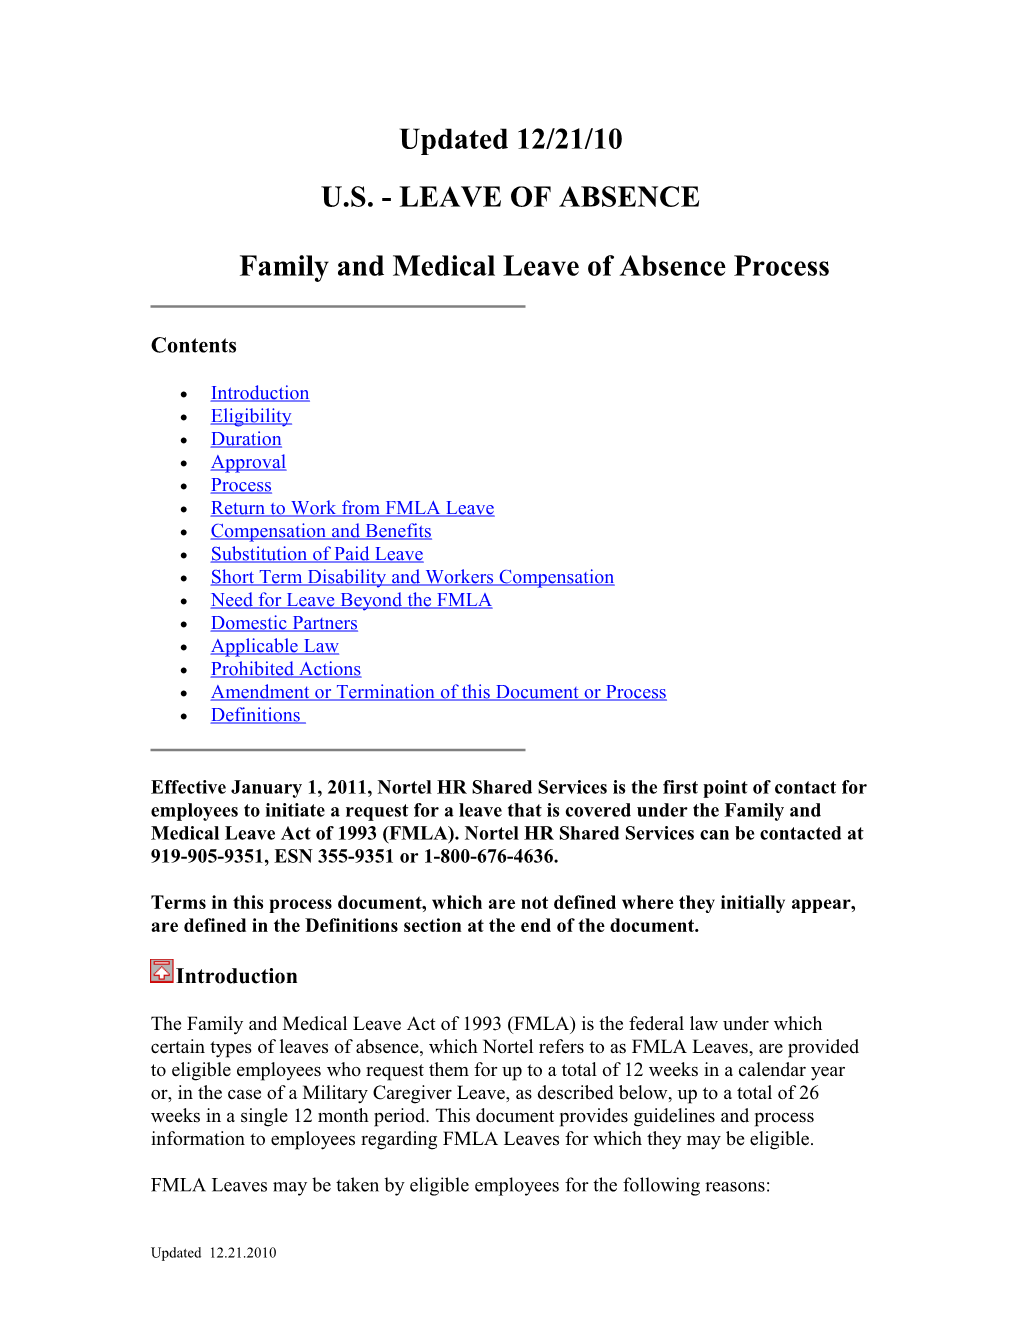 U.S. - LEAVE of Absencefamily and Medical Leave of Absence Process